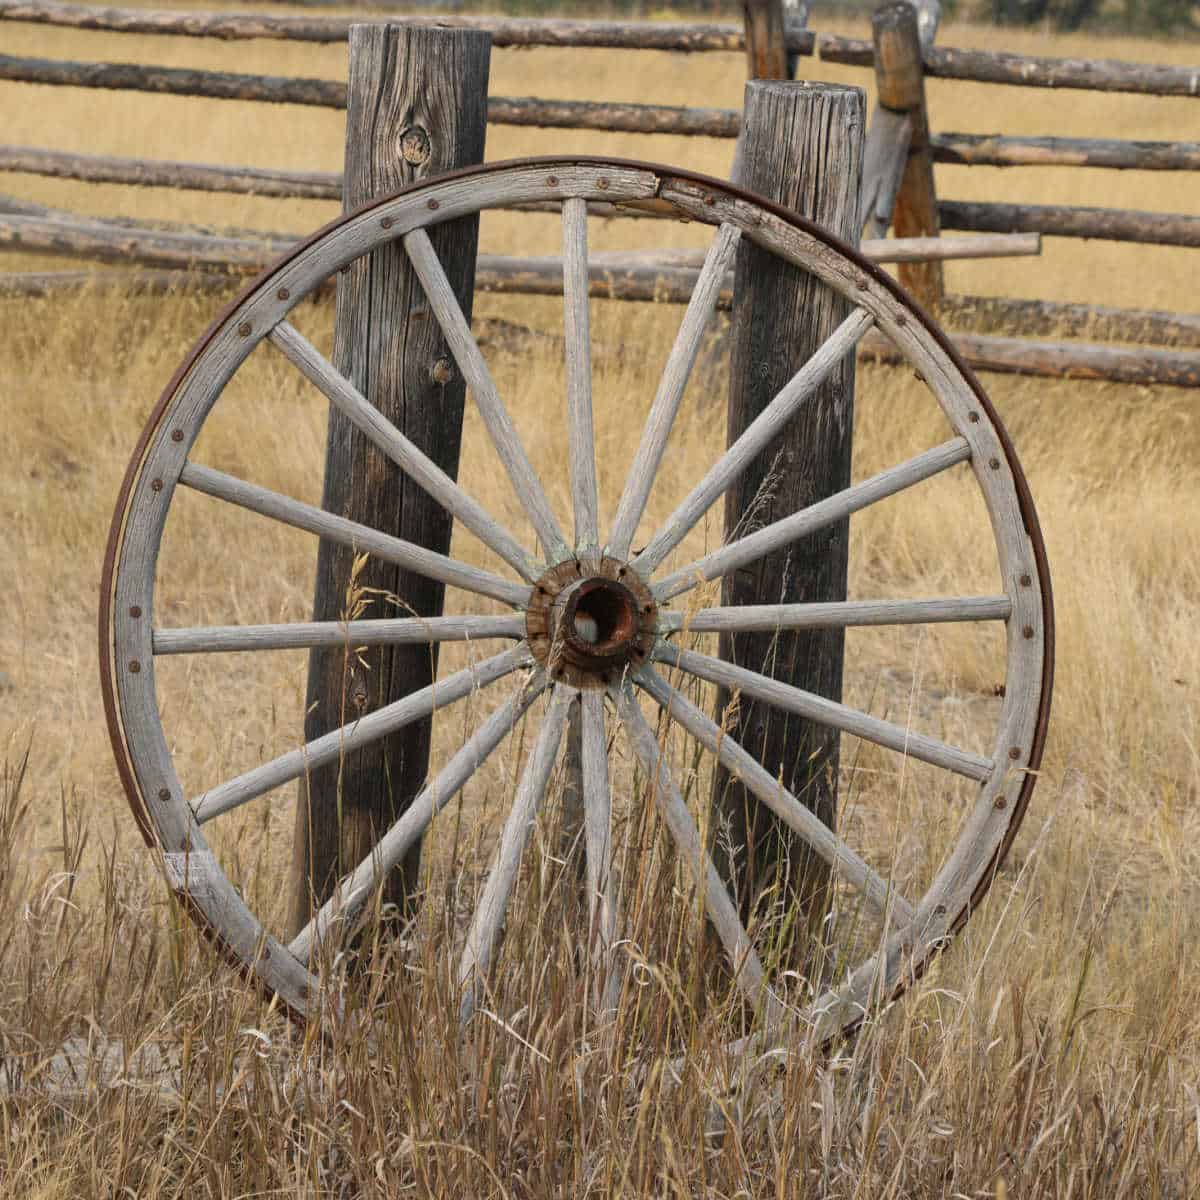 Historic Wagon wheel leaning against a fence post in Grant-Kohrs Ranch National Historic Site 